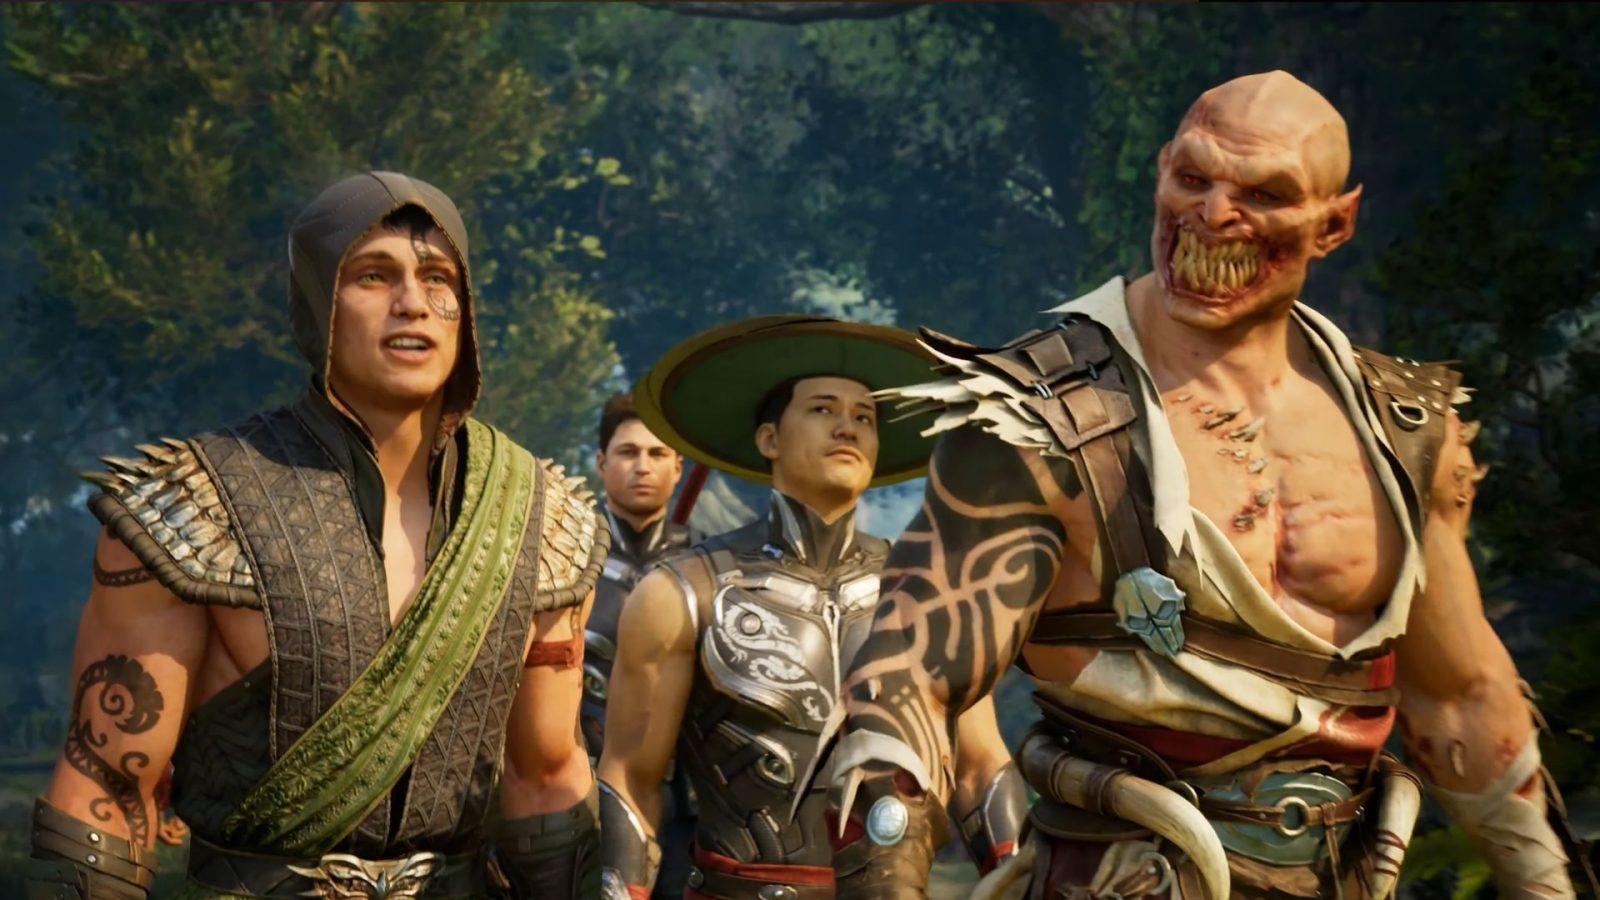 Mortal Kombat 1's entire roster reportedly leaked 2 weeks early - Dexerto